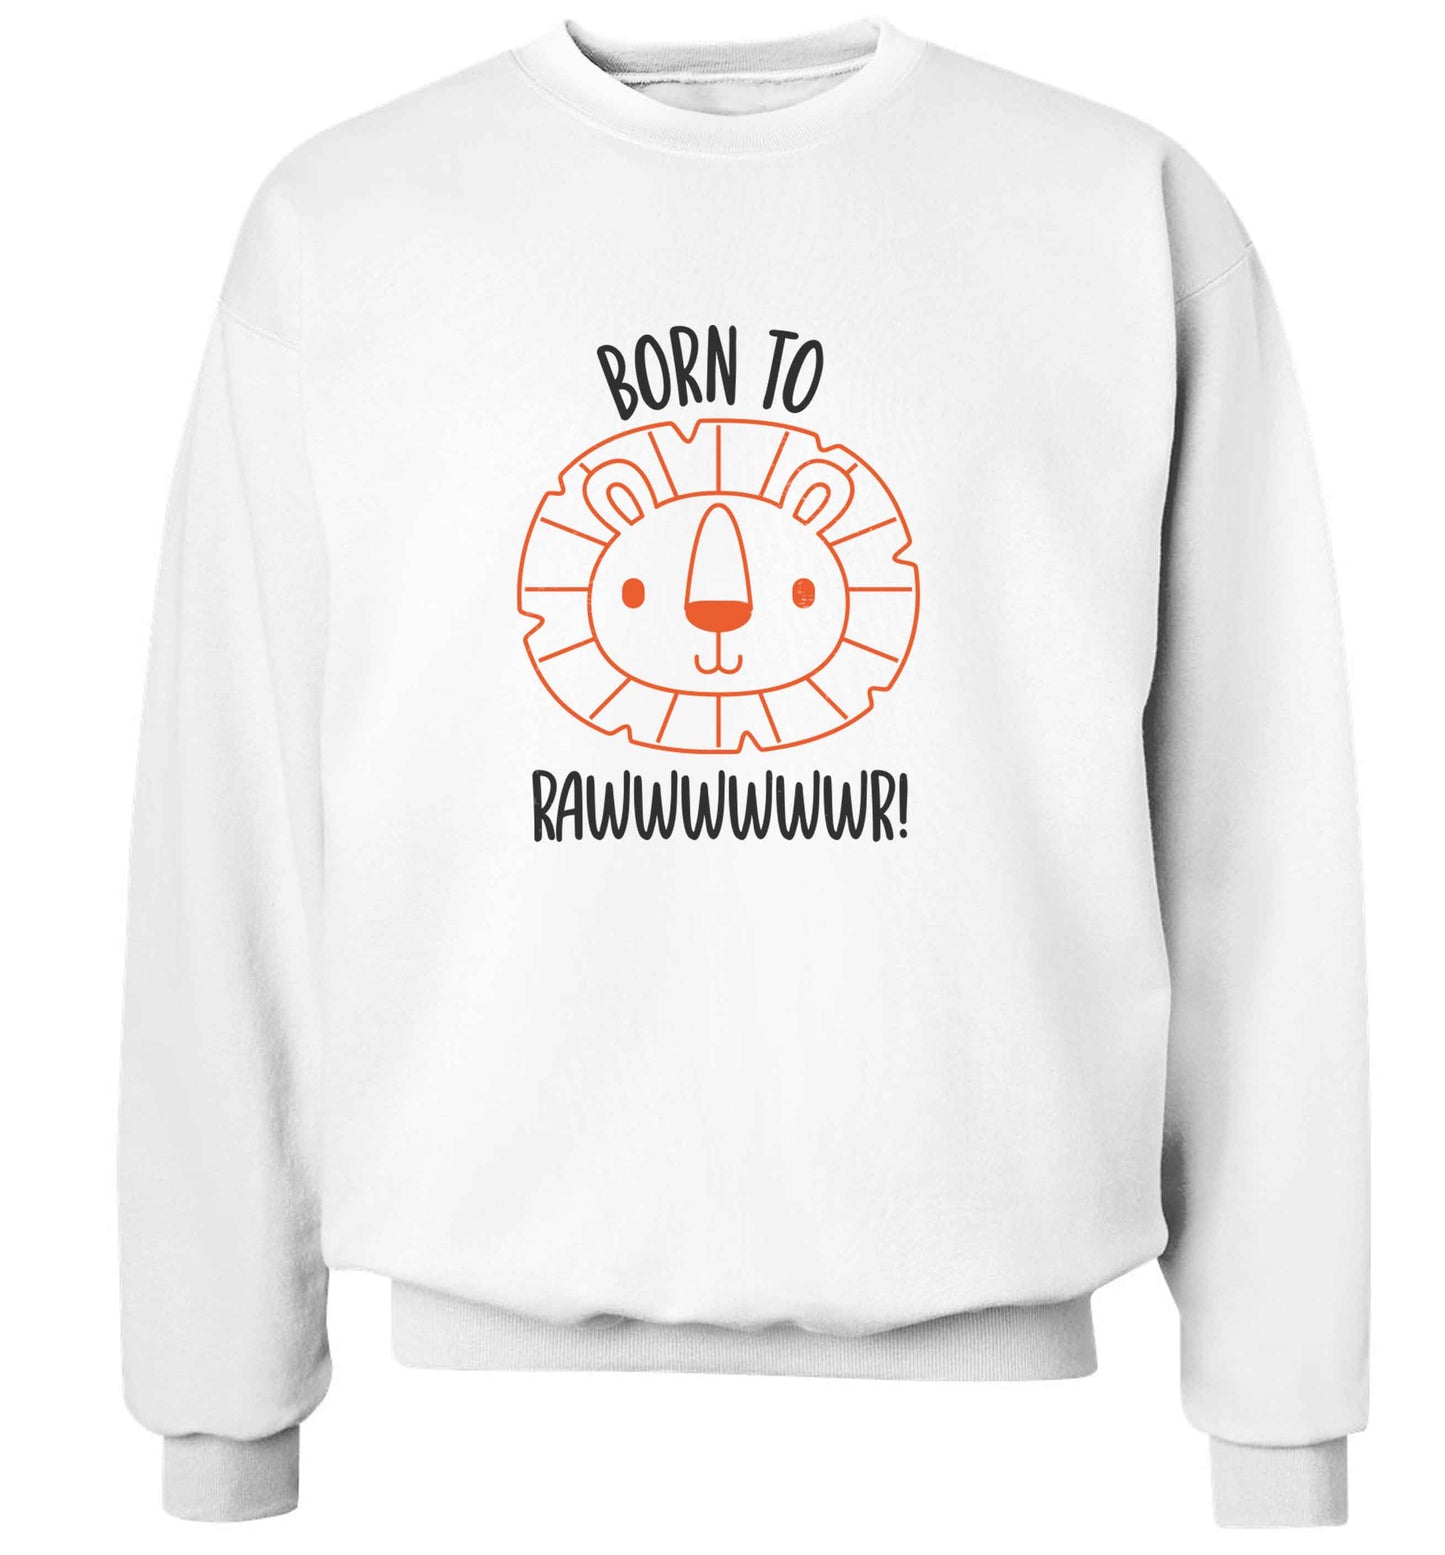 Born to rawr adult's unisex white sweater 2XL